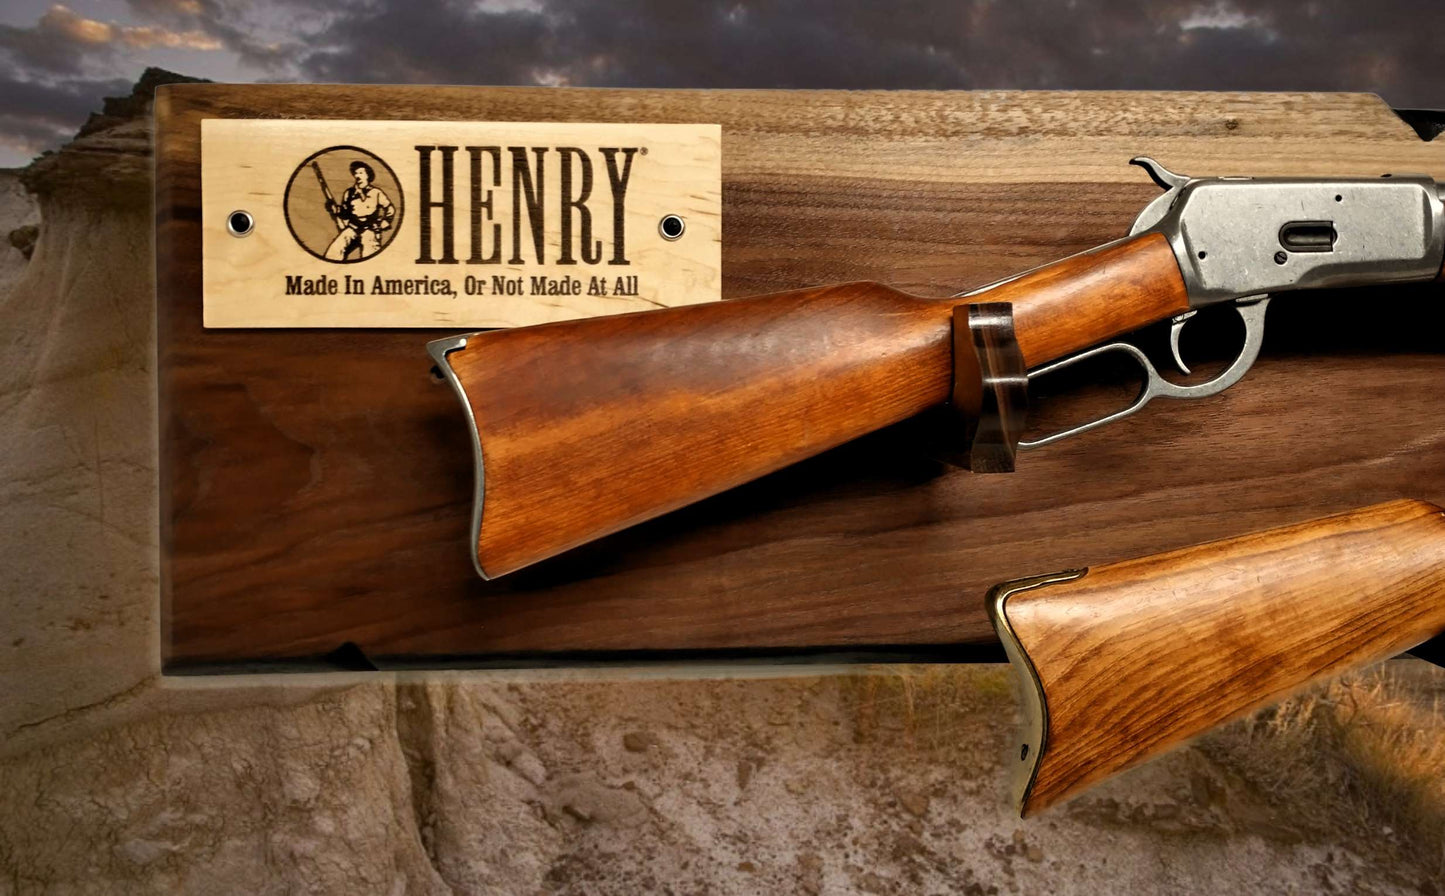 Walker Wood Gifts Gun Display Rustic Henry Lever Action 2 Place Walnut Gun Rack Wall Display Collecters Gift Western Decor